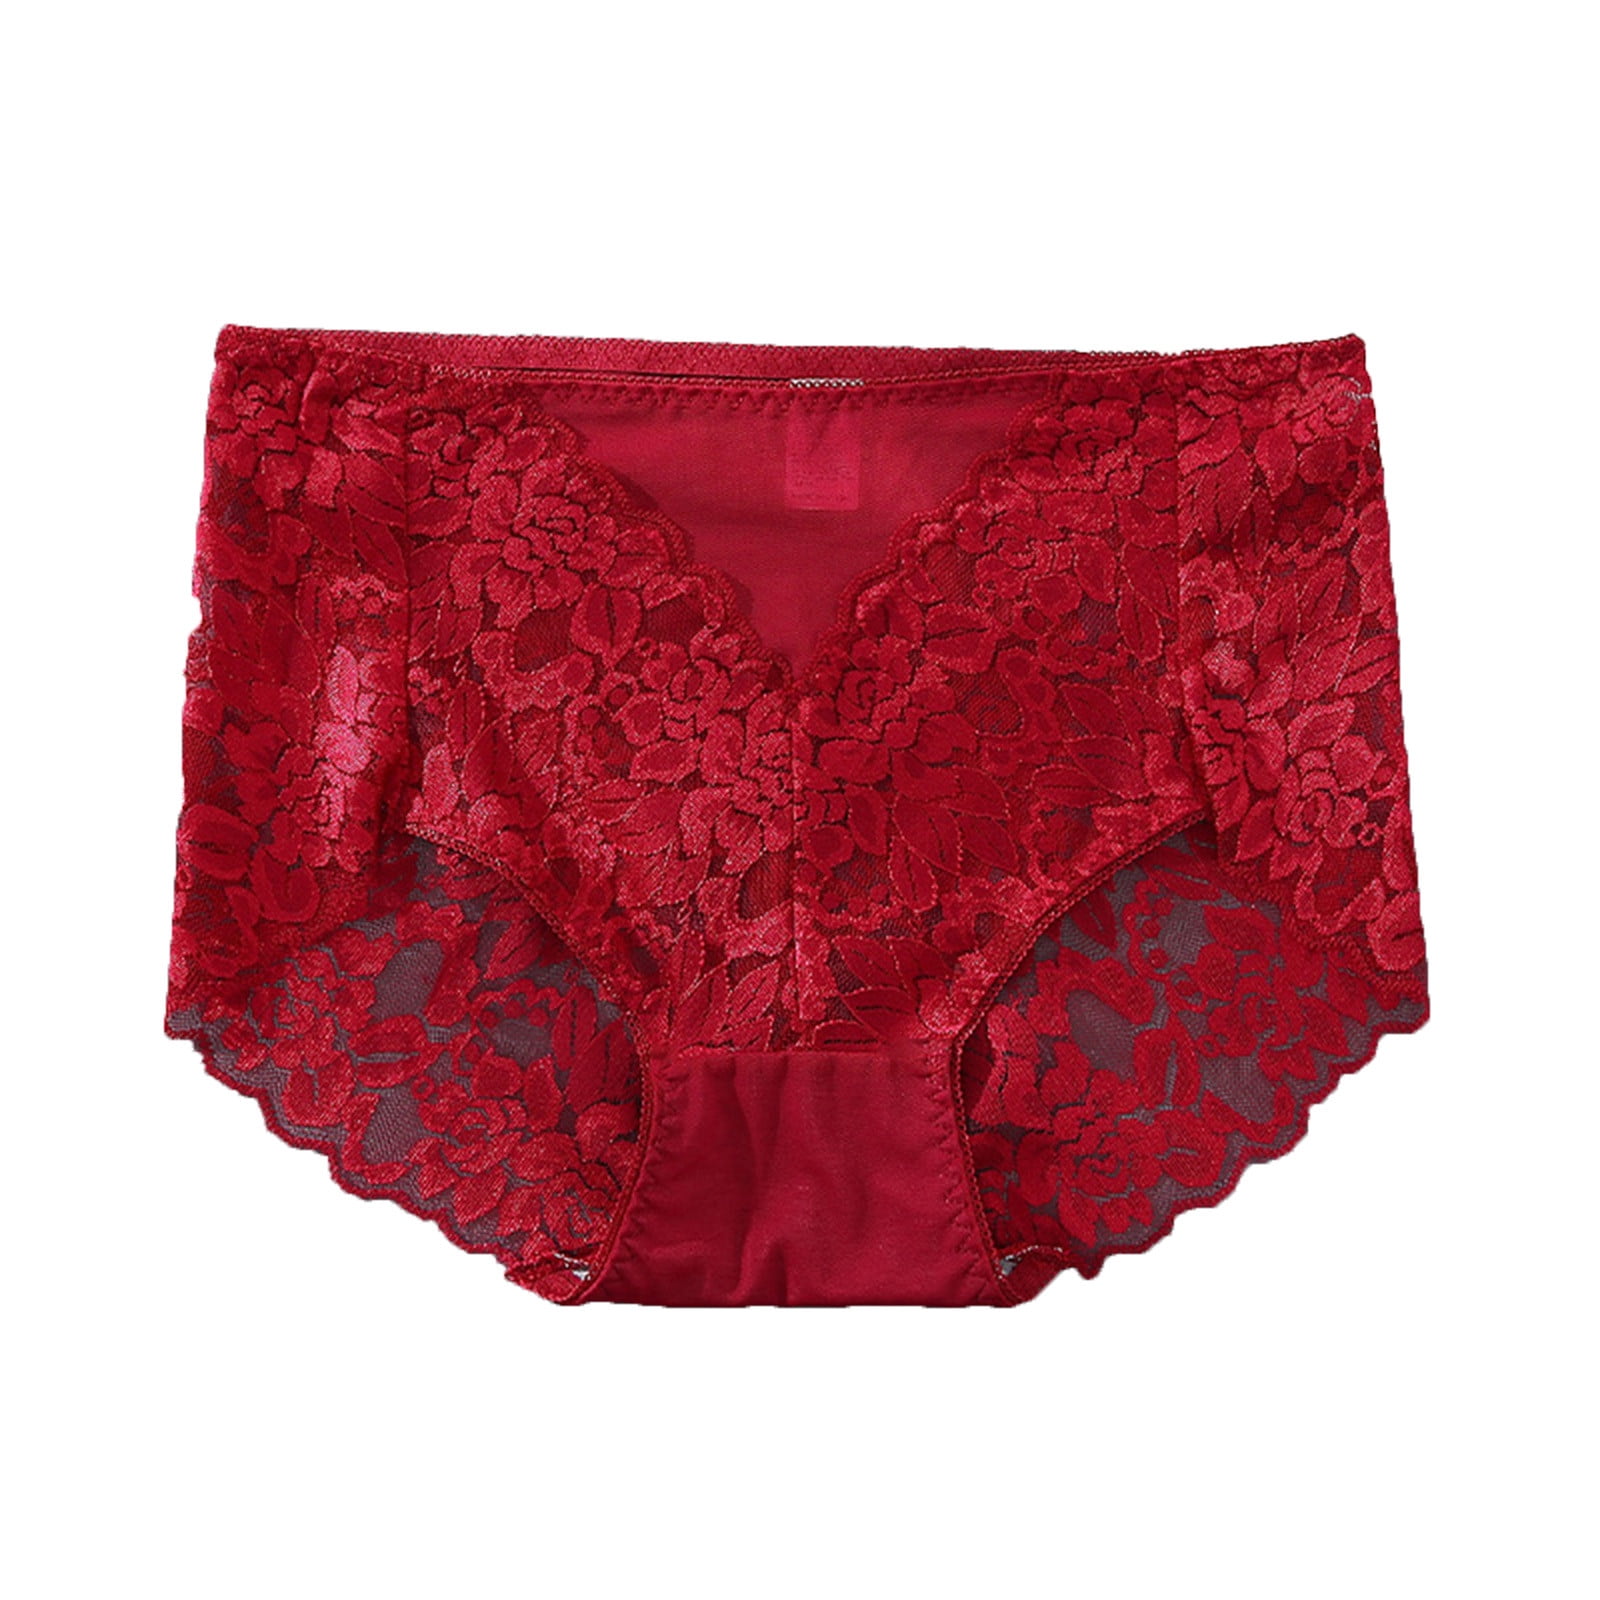 Buy Vintage Womens Panties High Cut Underwear Red Vanity Fair Delta Talla  Lunaire Charnos Warners Charms Lace Silky Lot Size 7 8 Large XL ECU 13  Online in India 